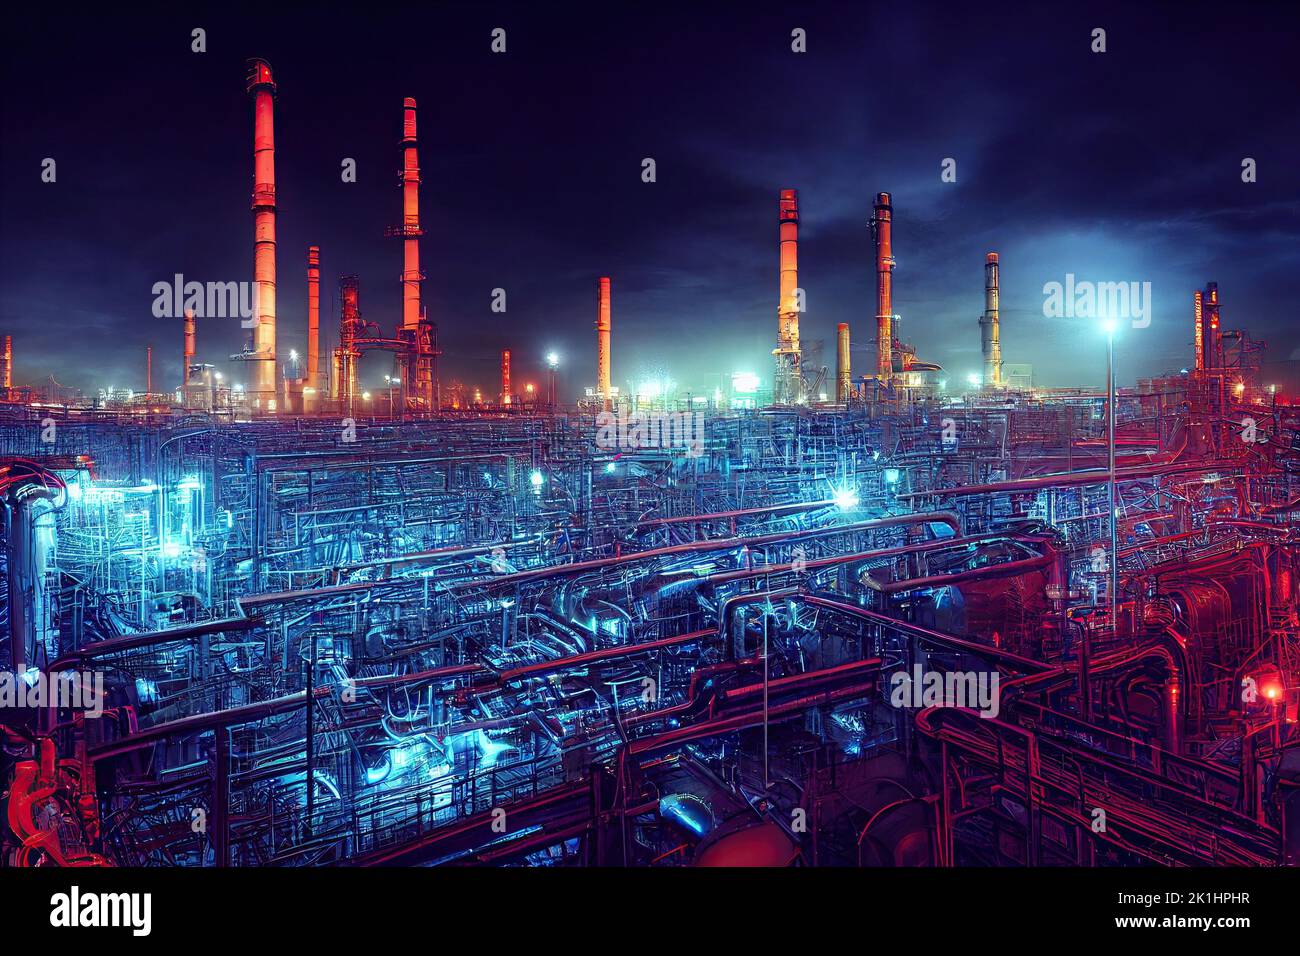 Floodlit industrial oil refinery factory in the night with glowing lights of blue and red. Chemicals warehouse with pipelines and smokestacks with Stock Photo